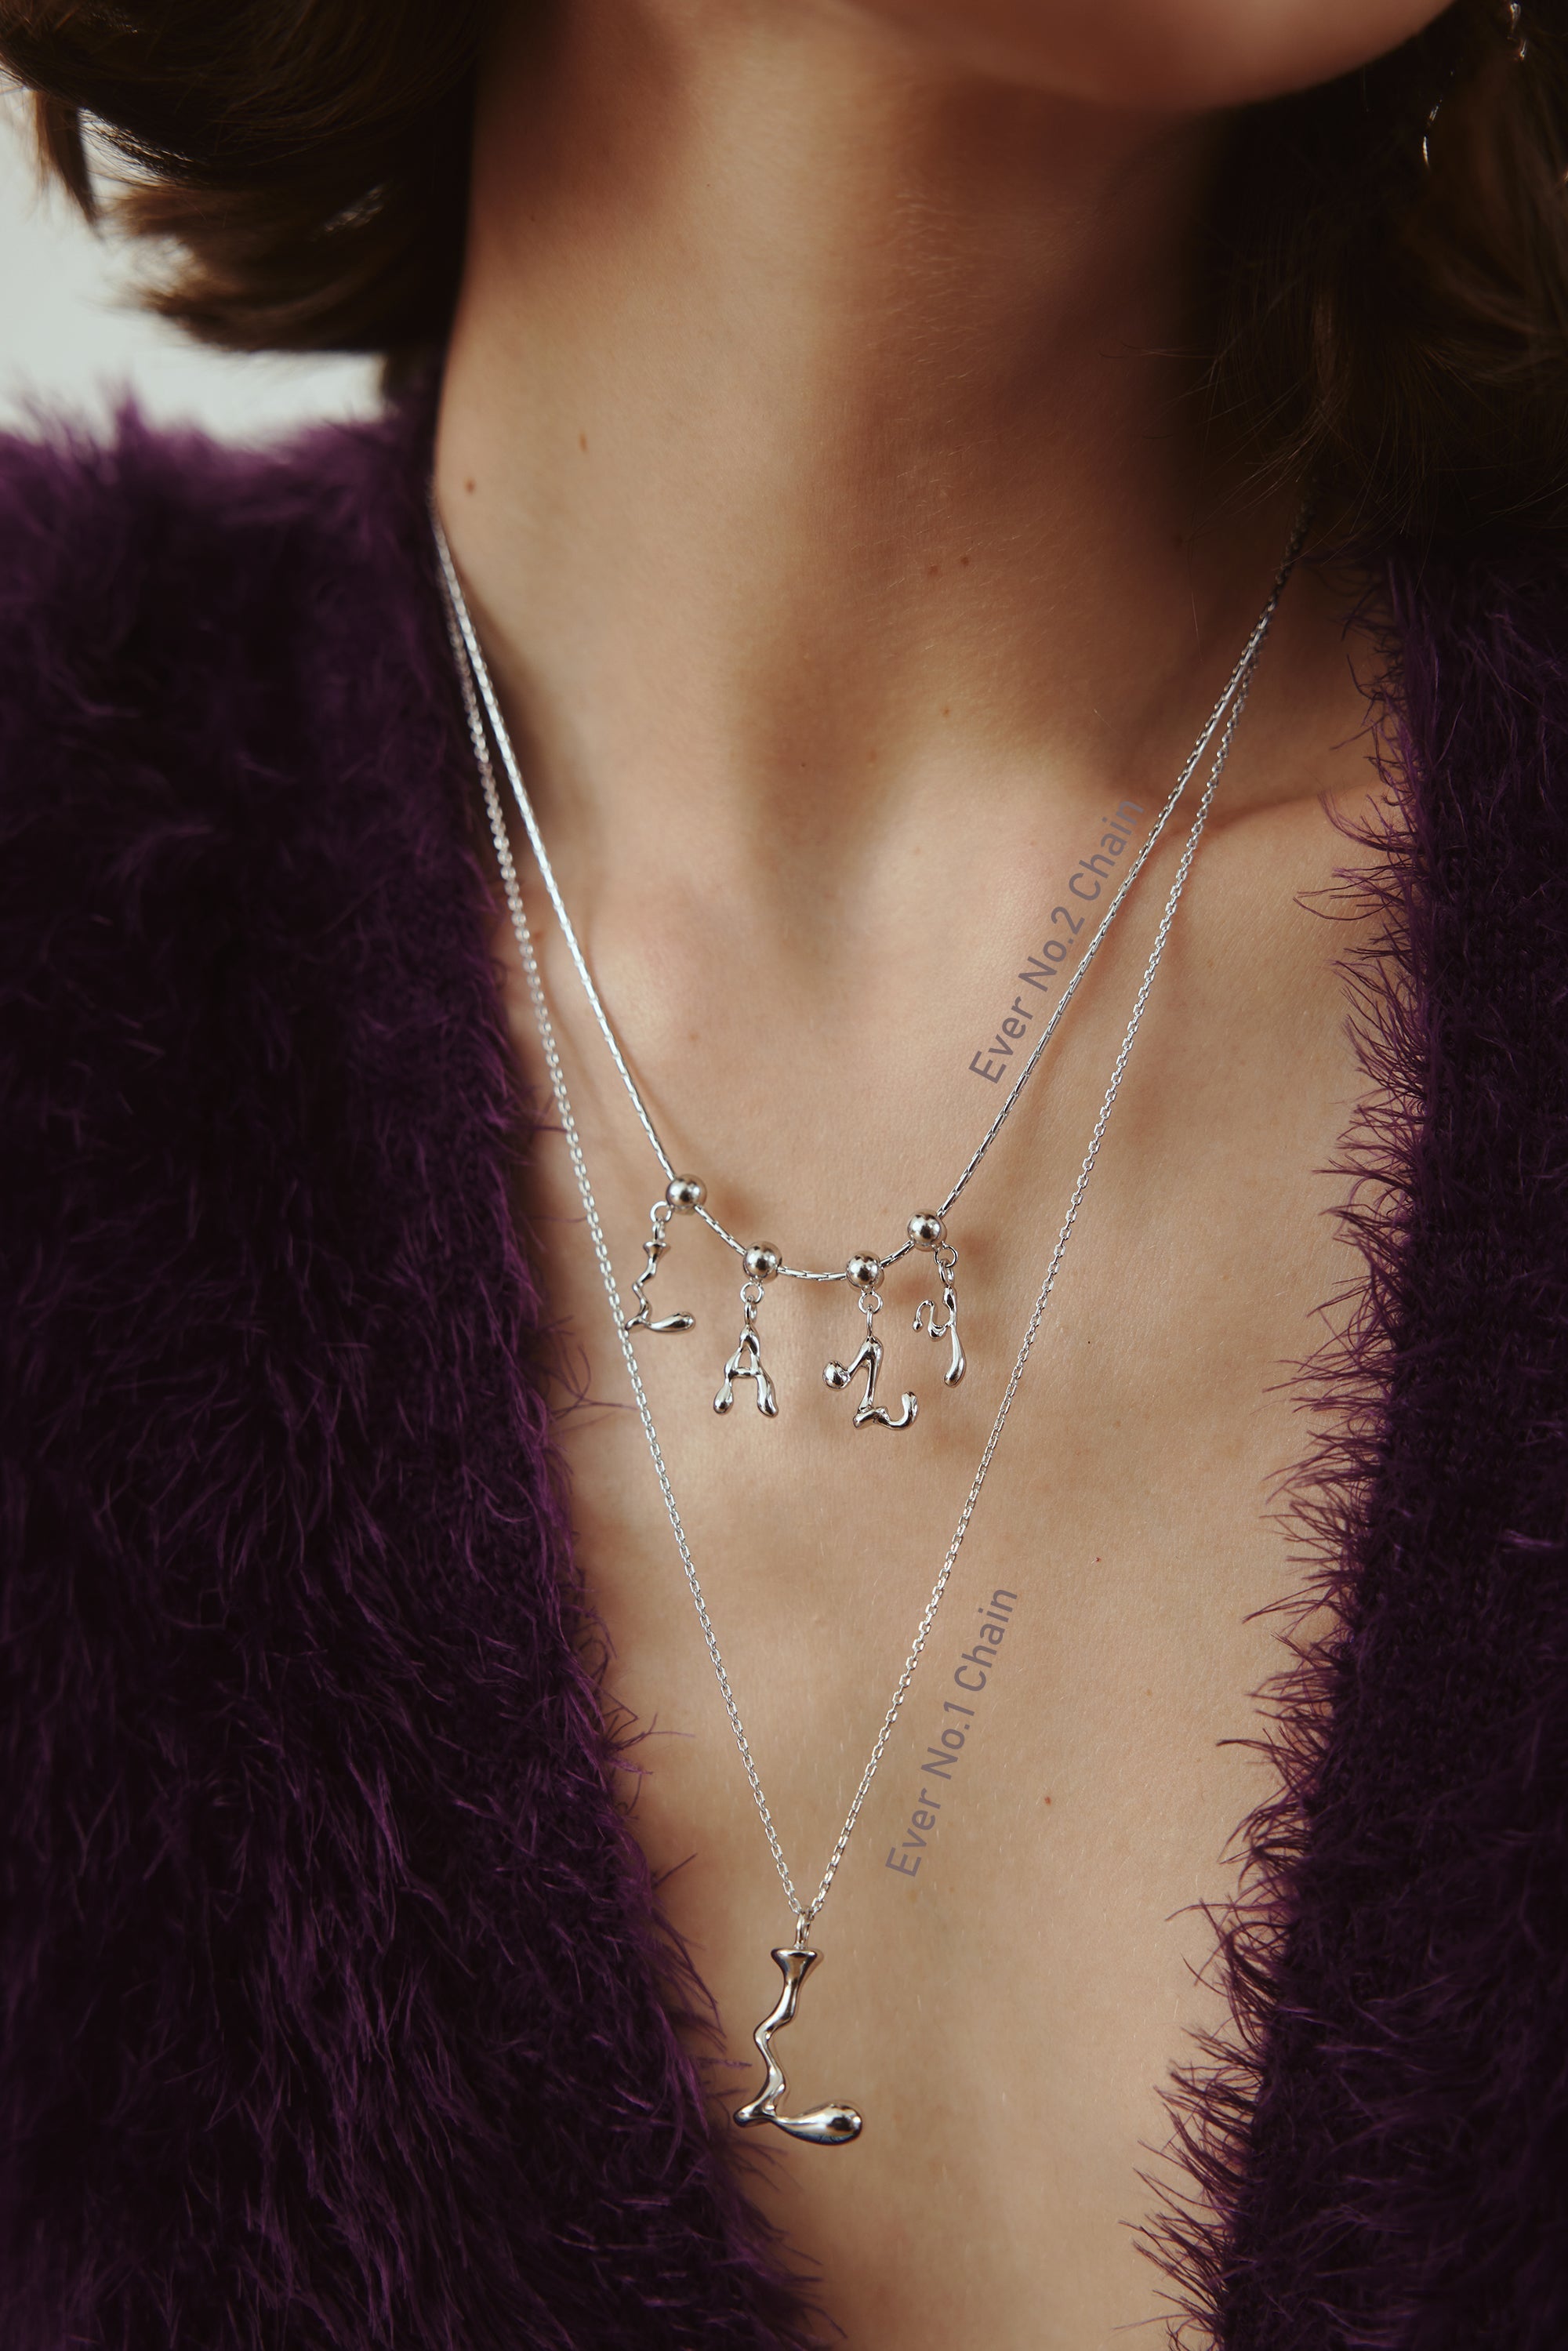 Ever No.1 Chain Necklace